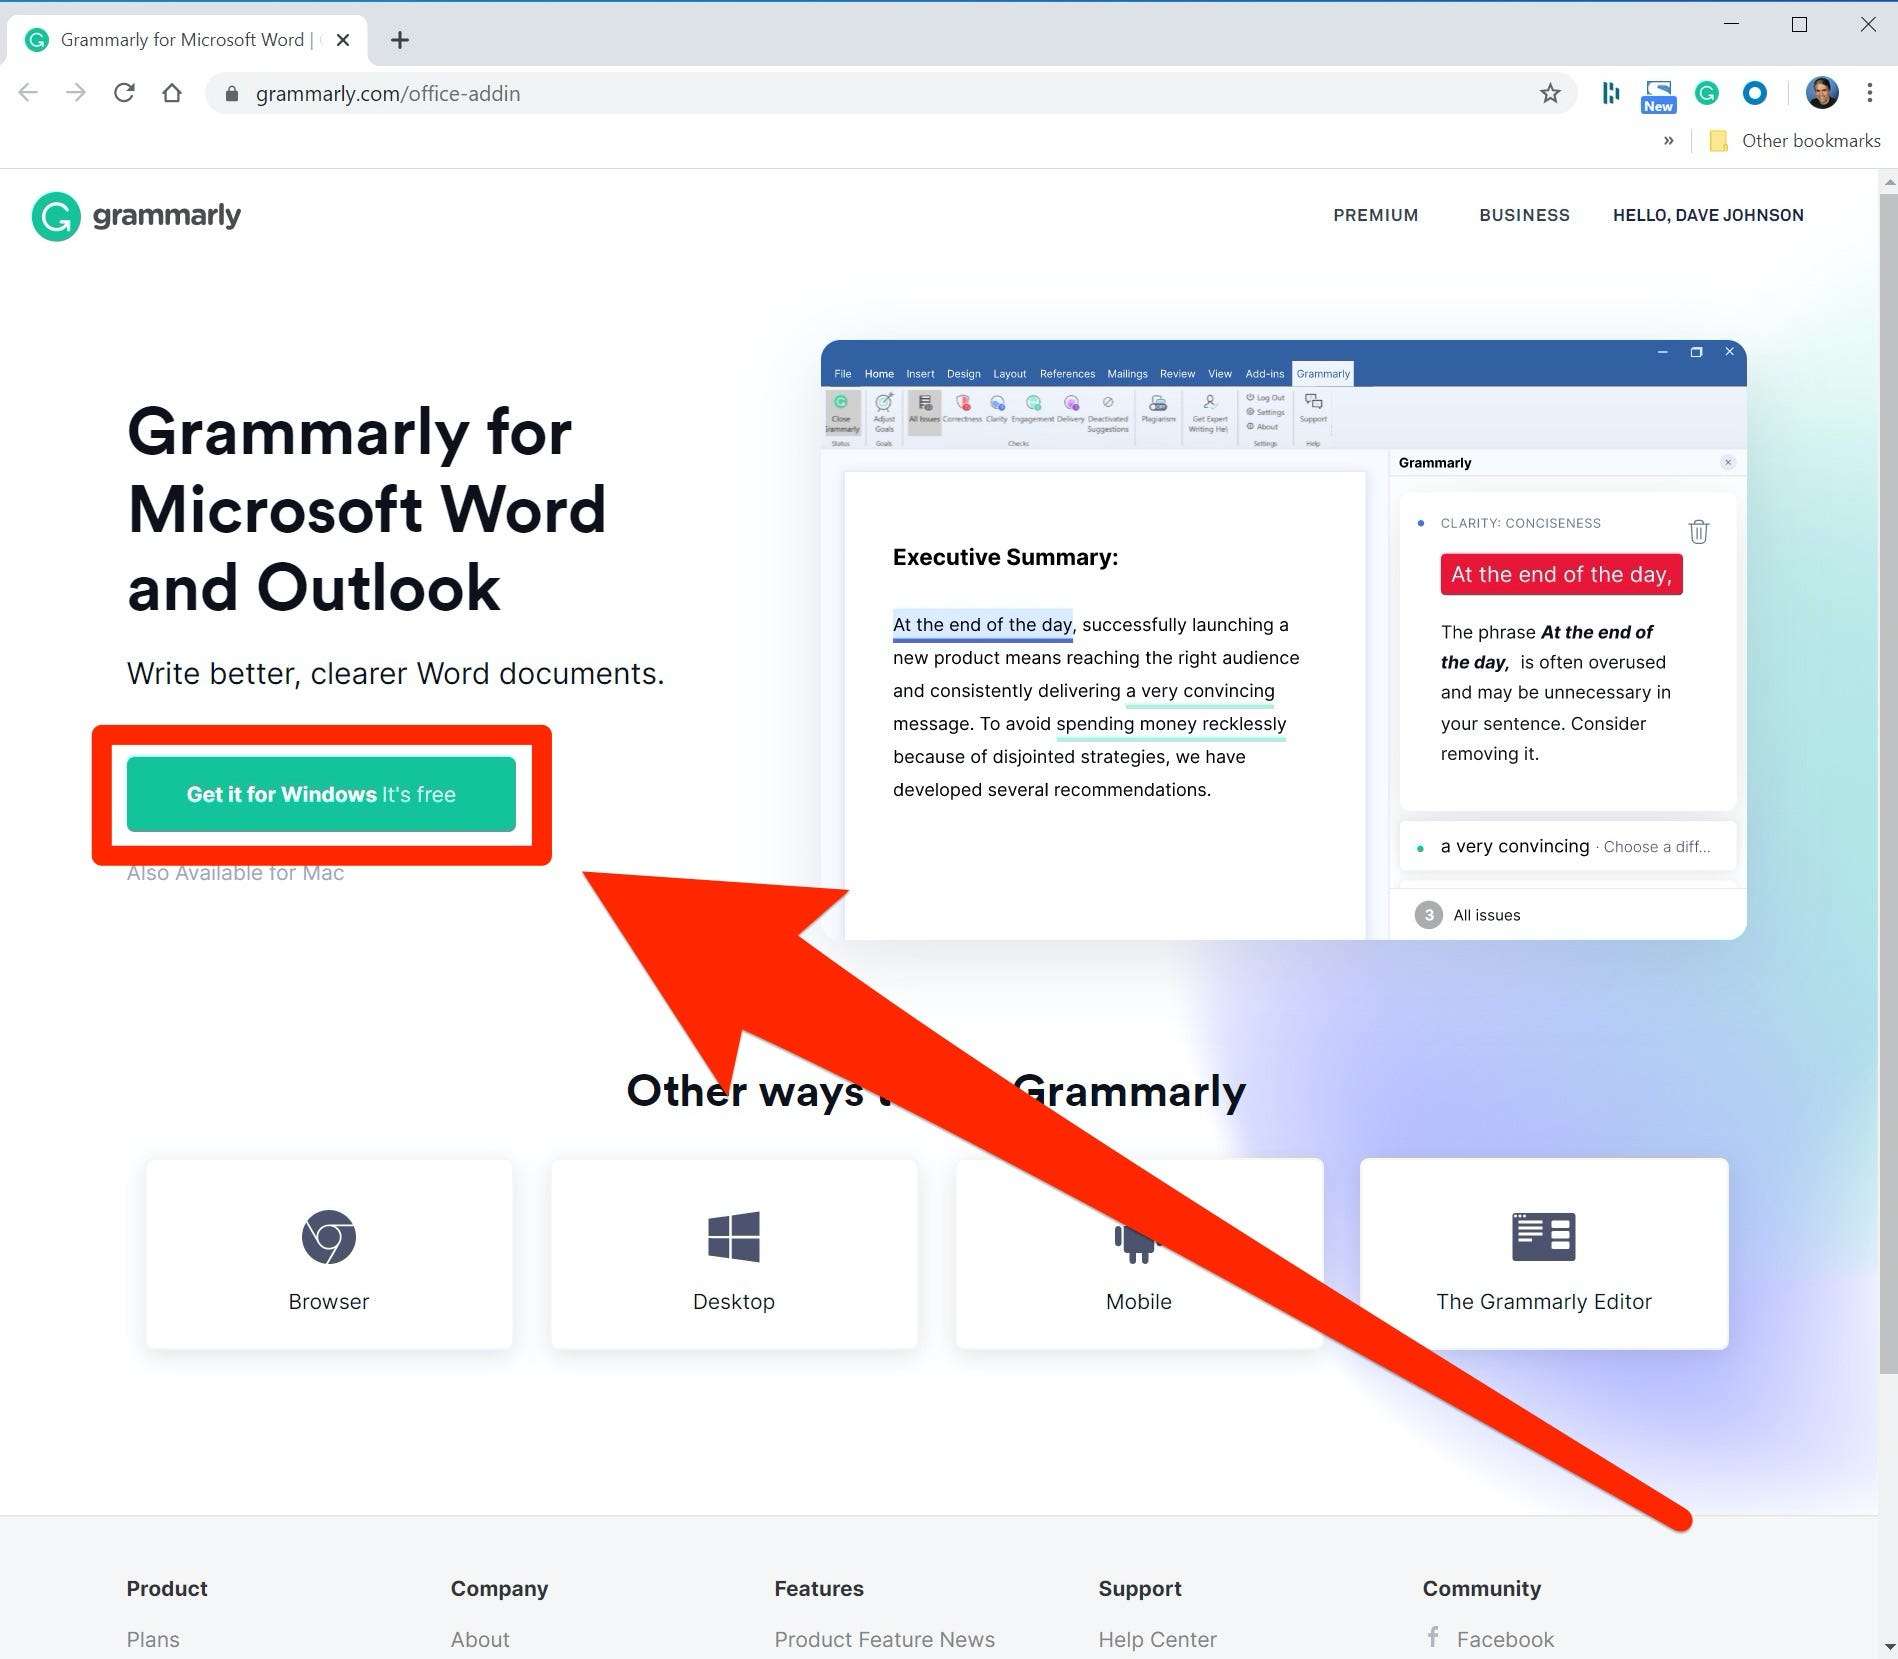 free grammarly for outlook.com